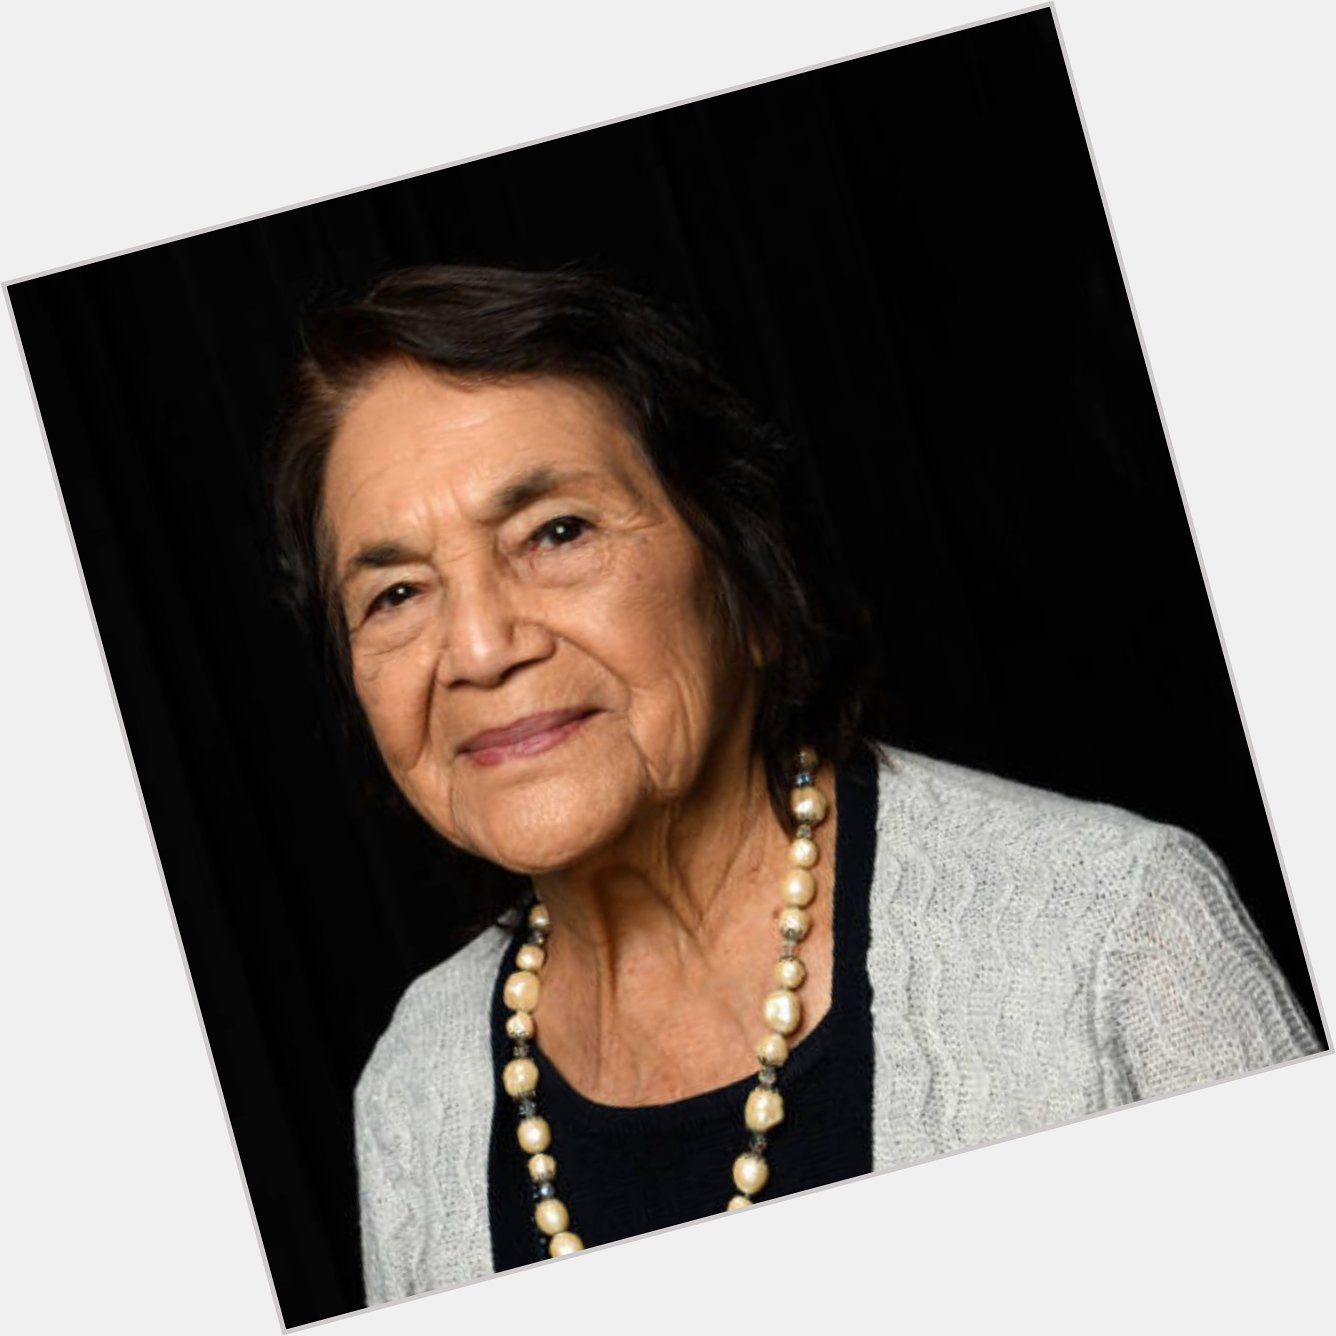 Happy birthday to one of the greatest activists in history, Dolores Huerta! 